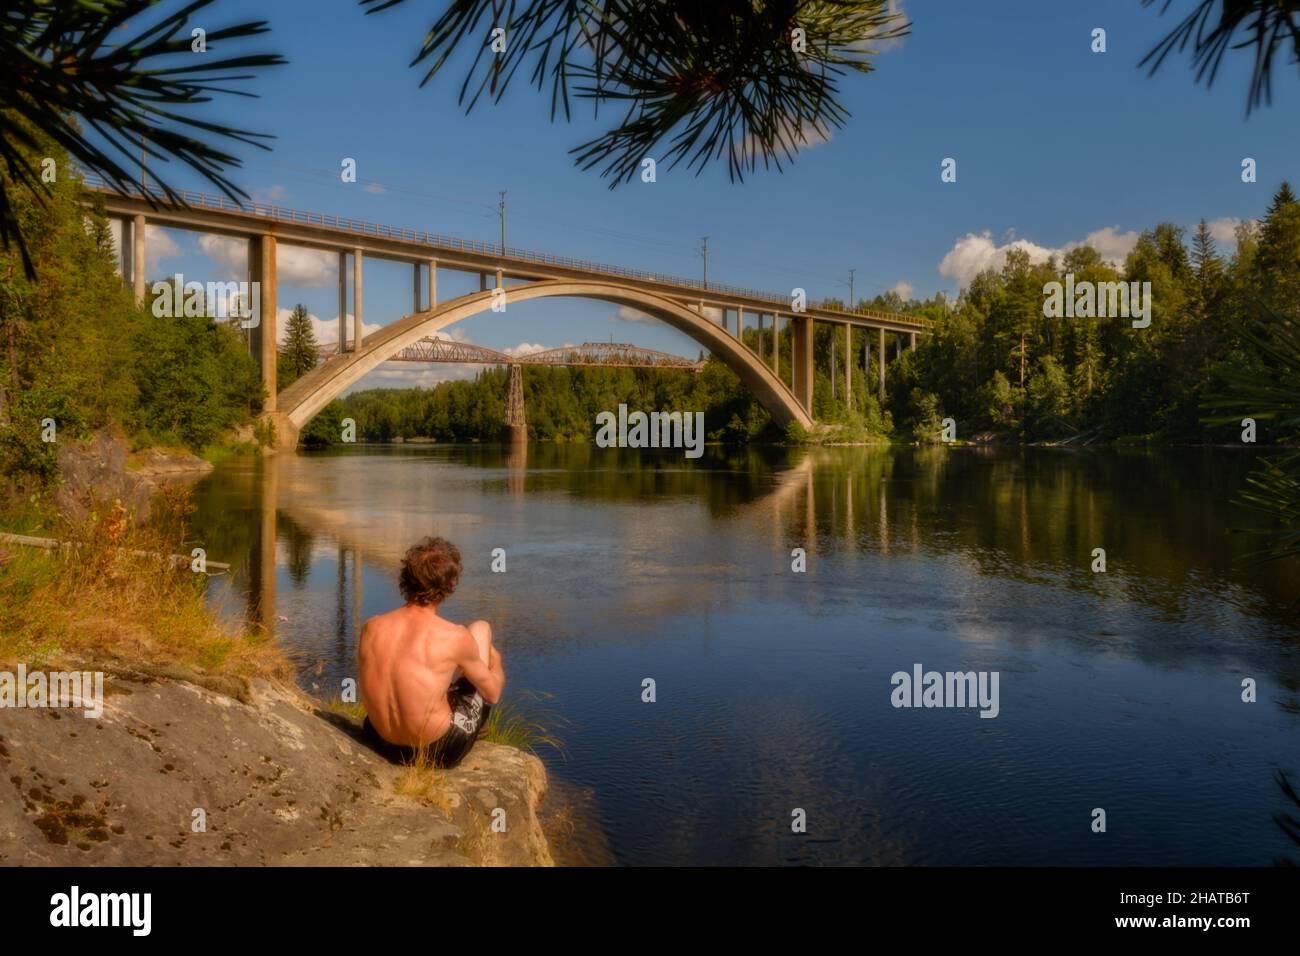 man sitting on roch watching bridges over a river Stock Photo